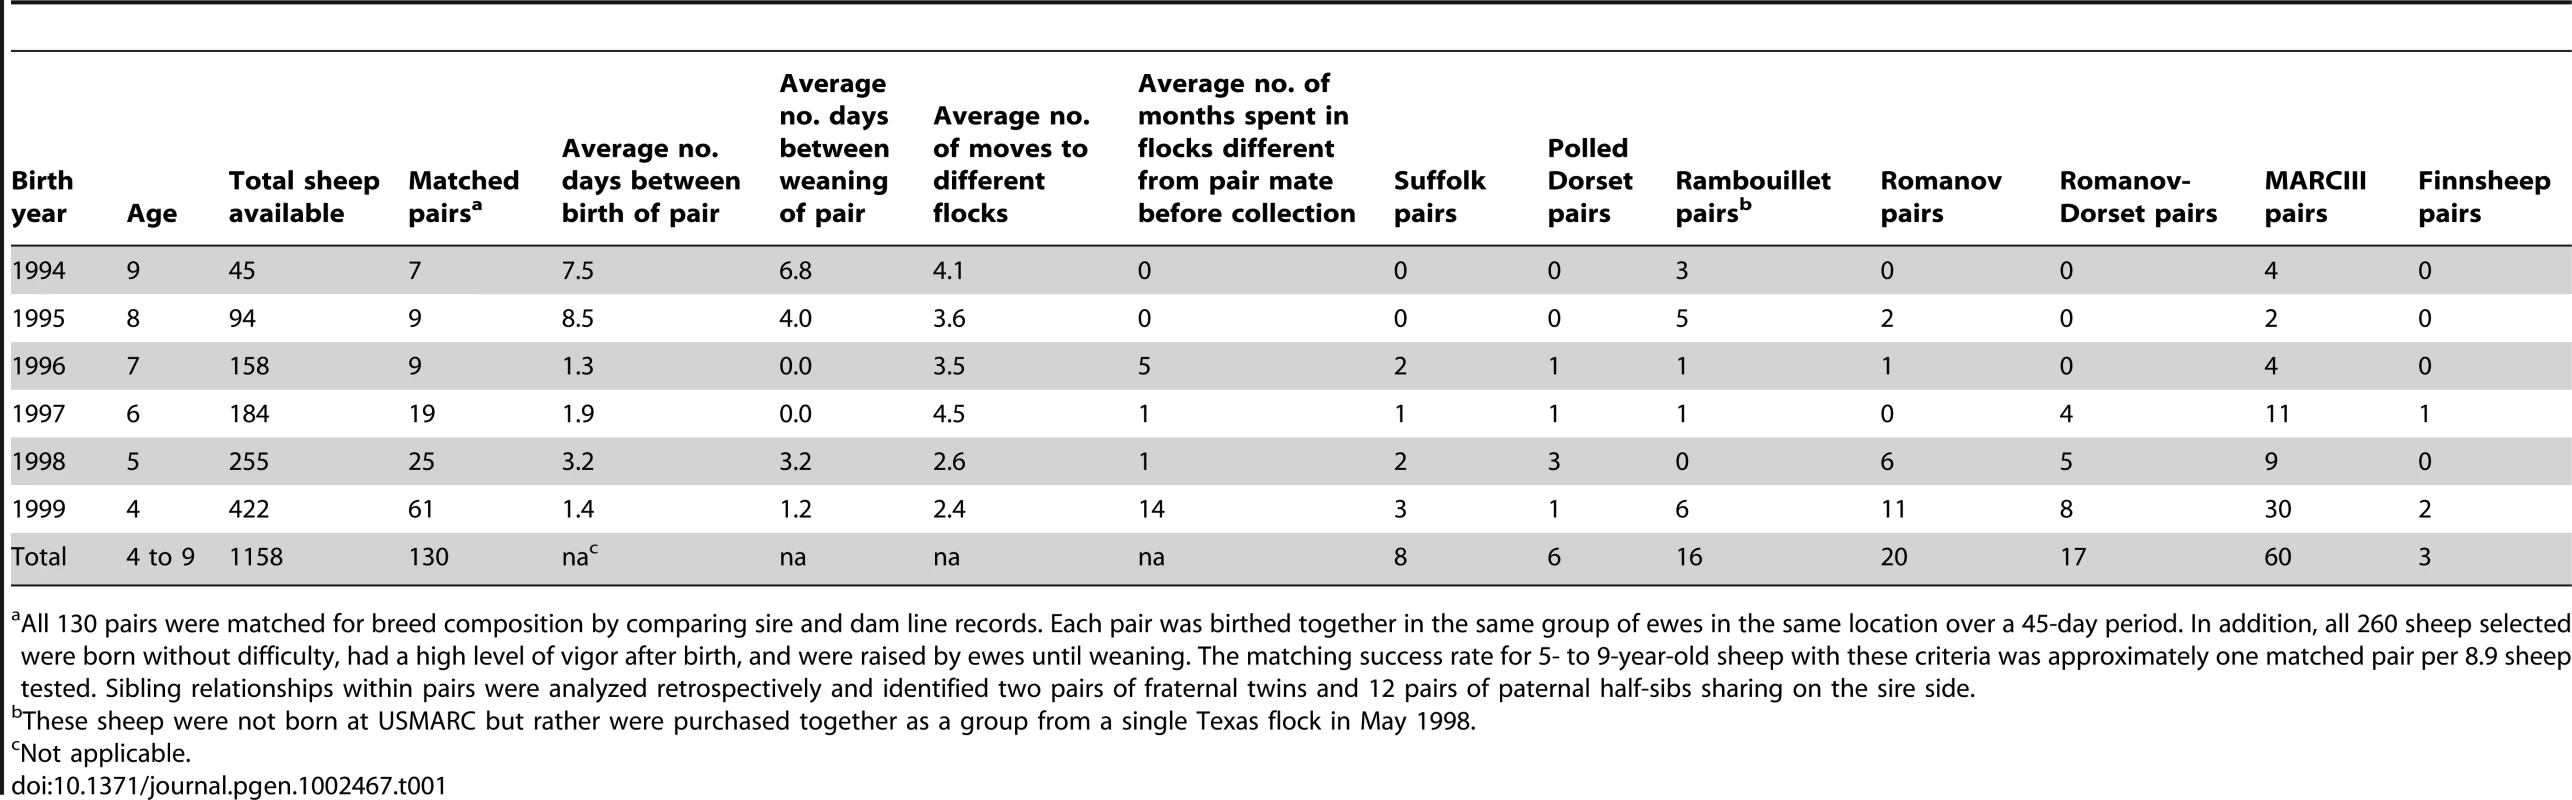 Historical attributes of matched pairs of infected and uninfected ewes.